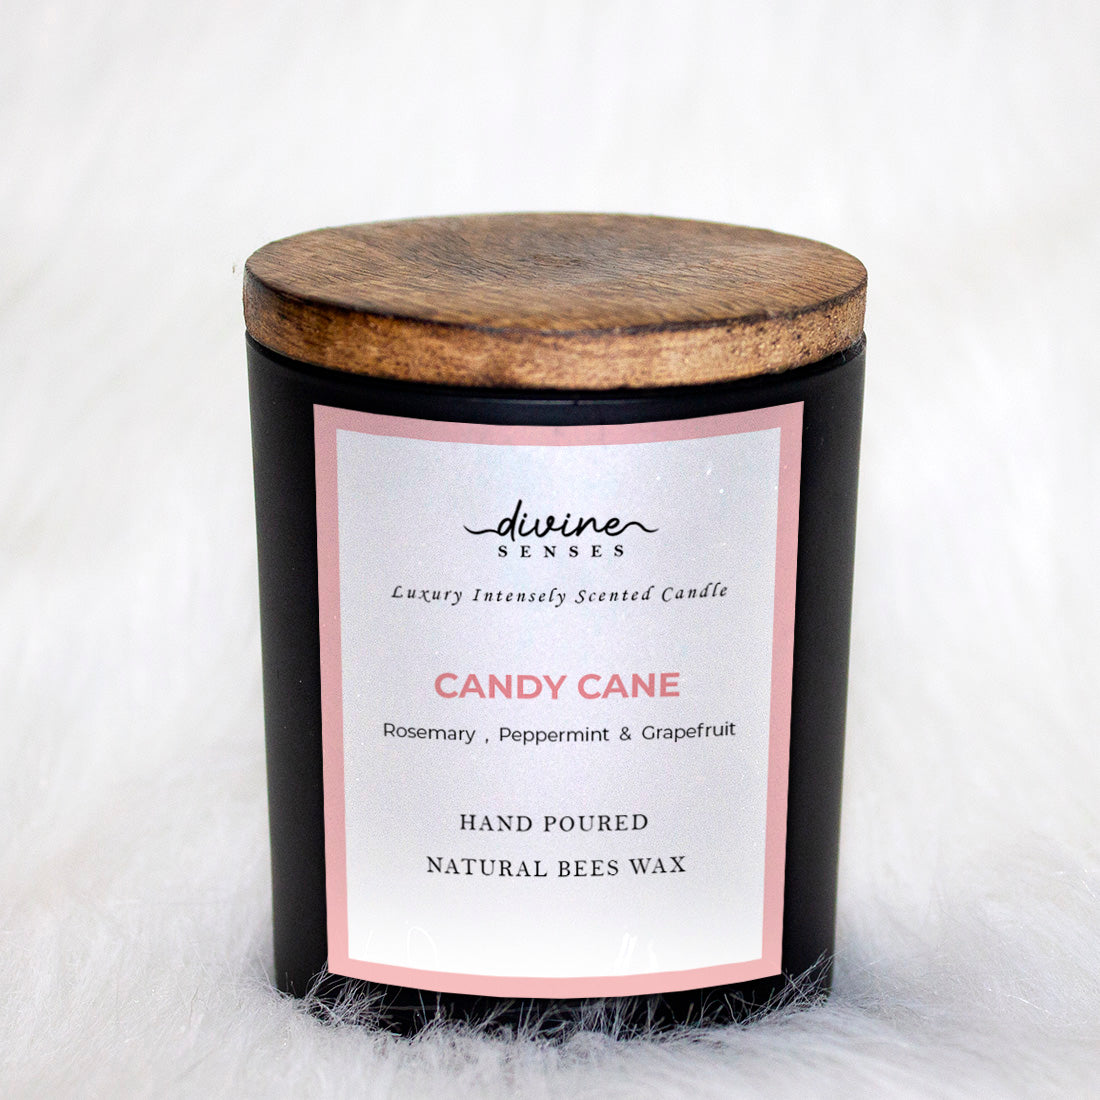 Grapefruit, Rosemary & Peppermint Glass Jar Scented Candle